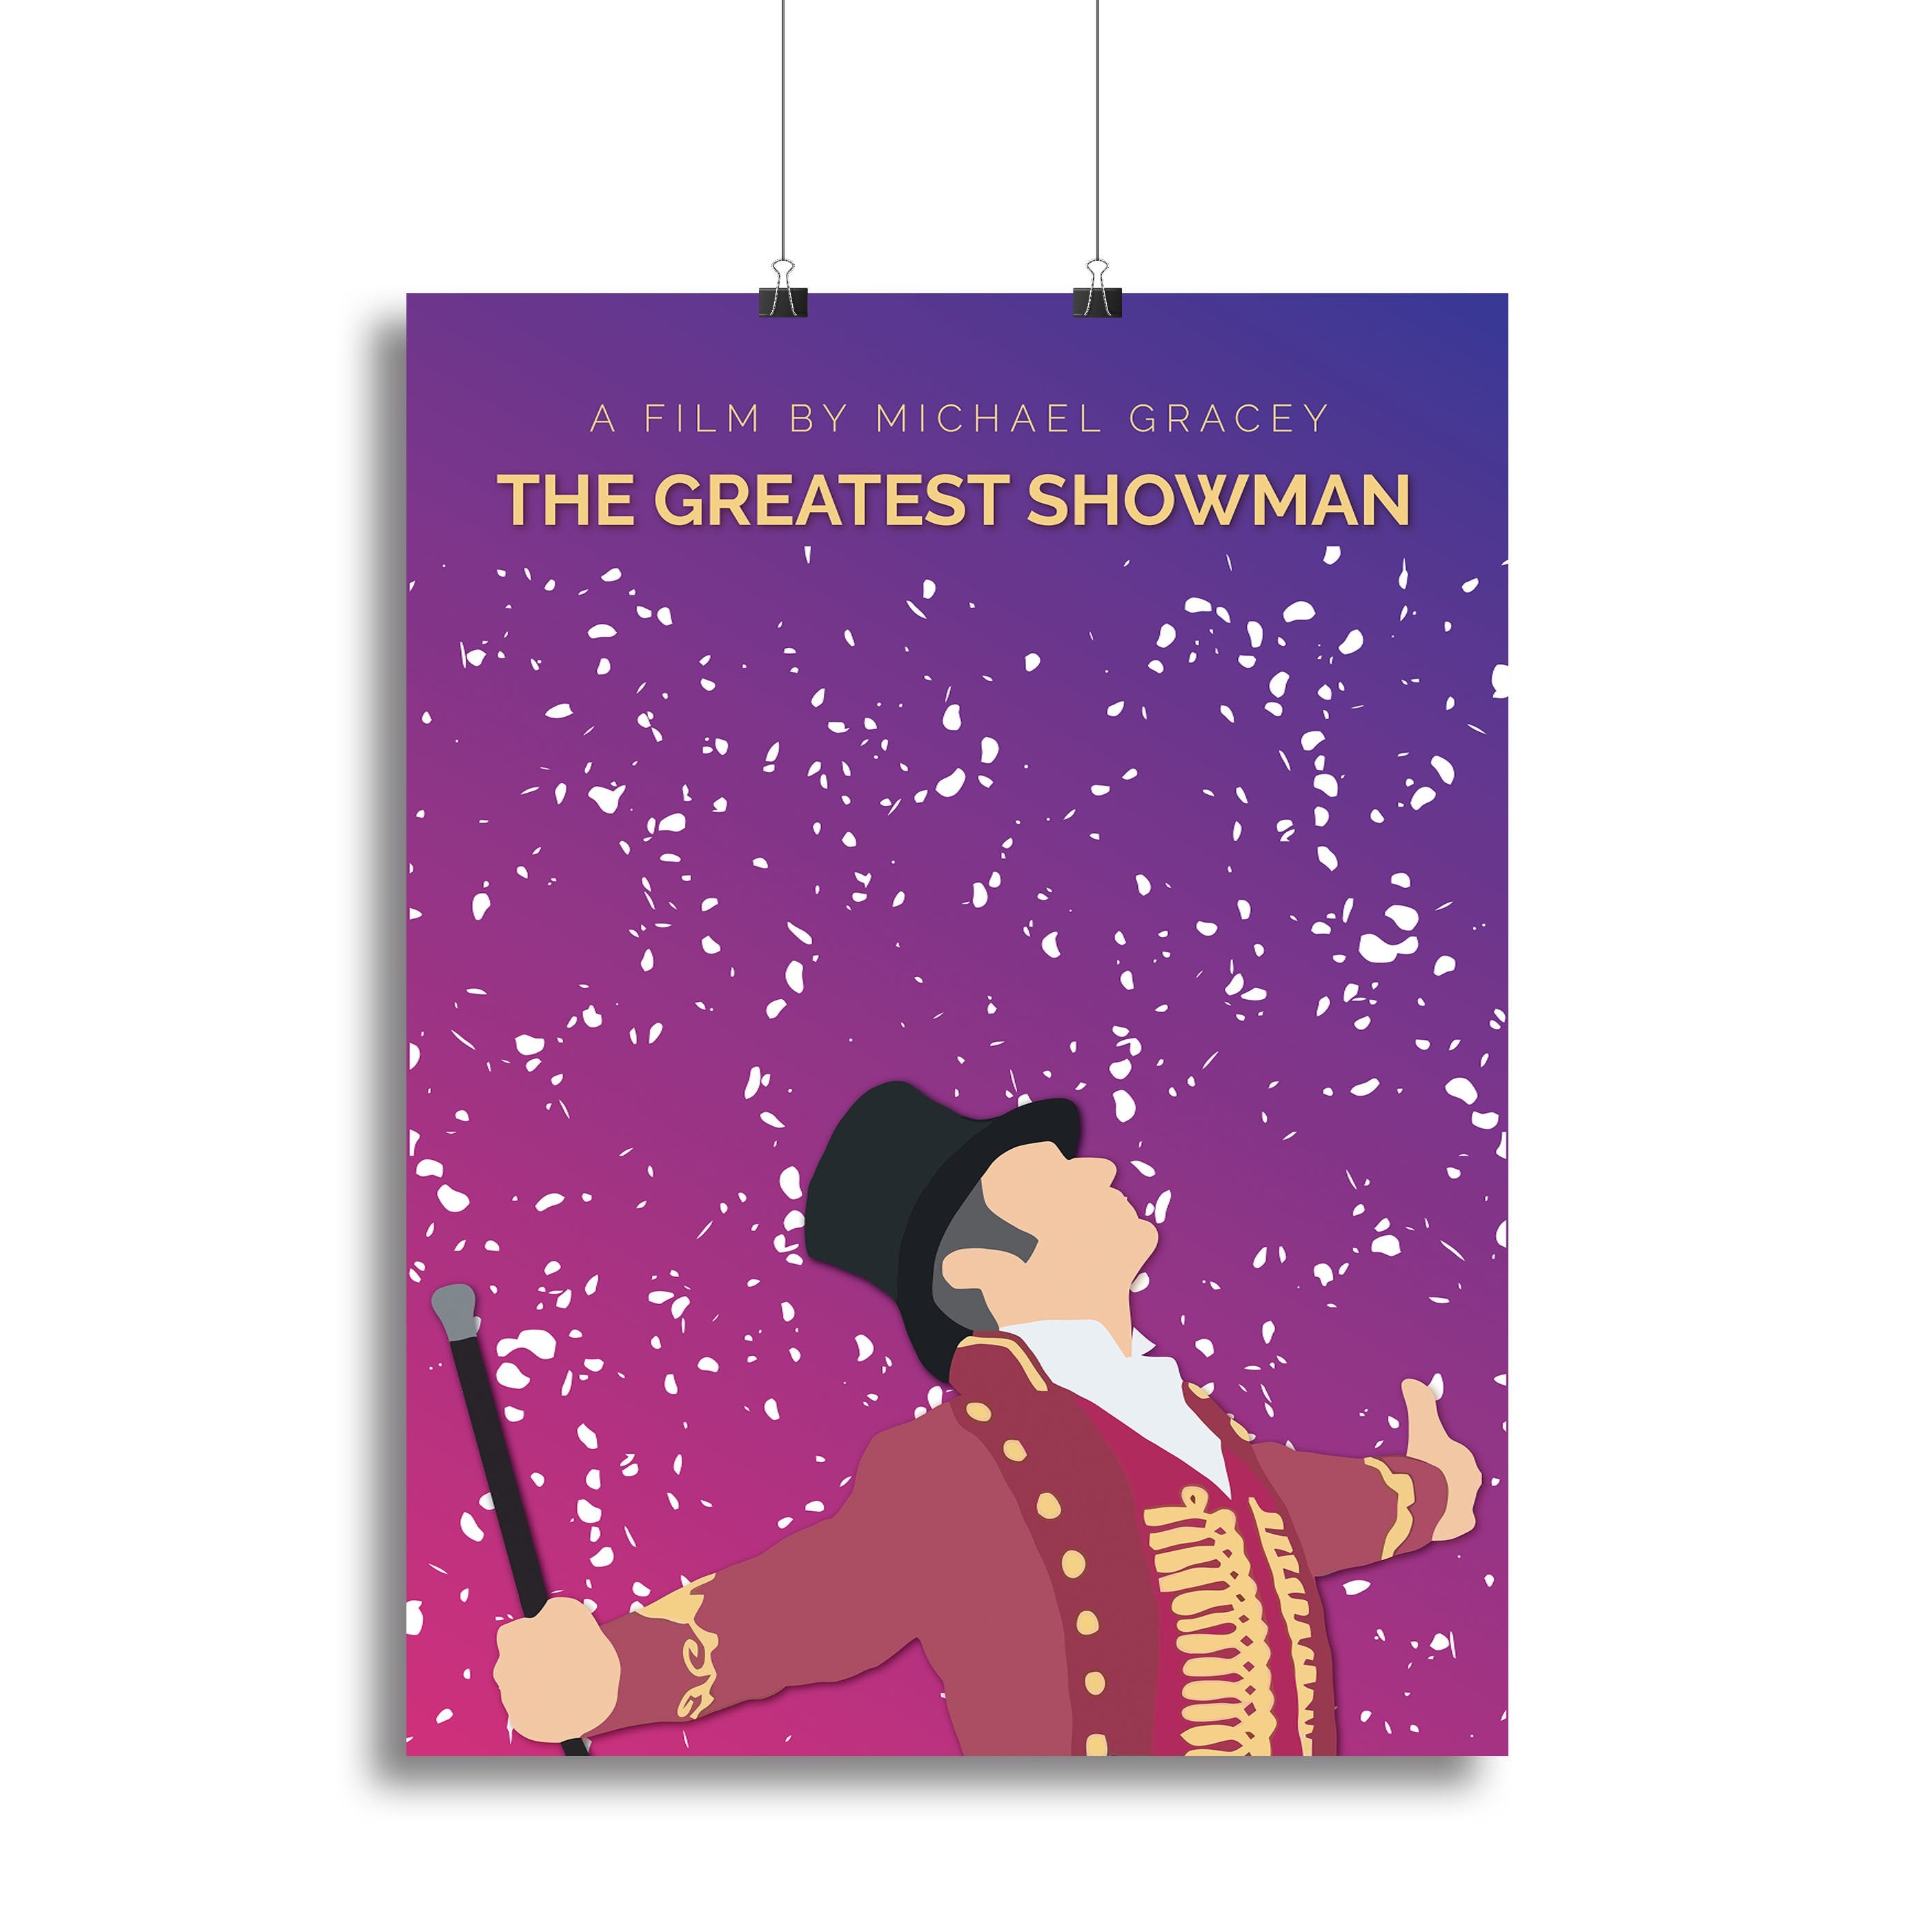 The Greatest Showman Minimal Movie Canvas Print or Poster